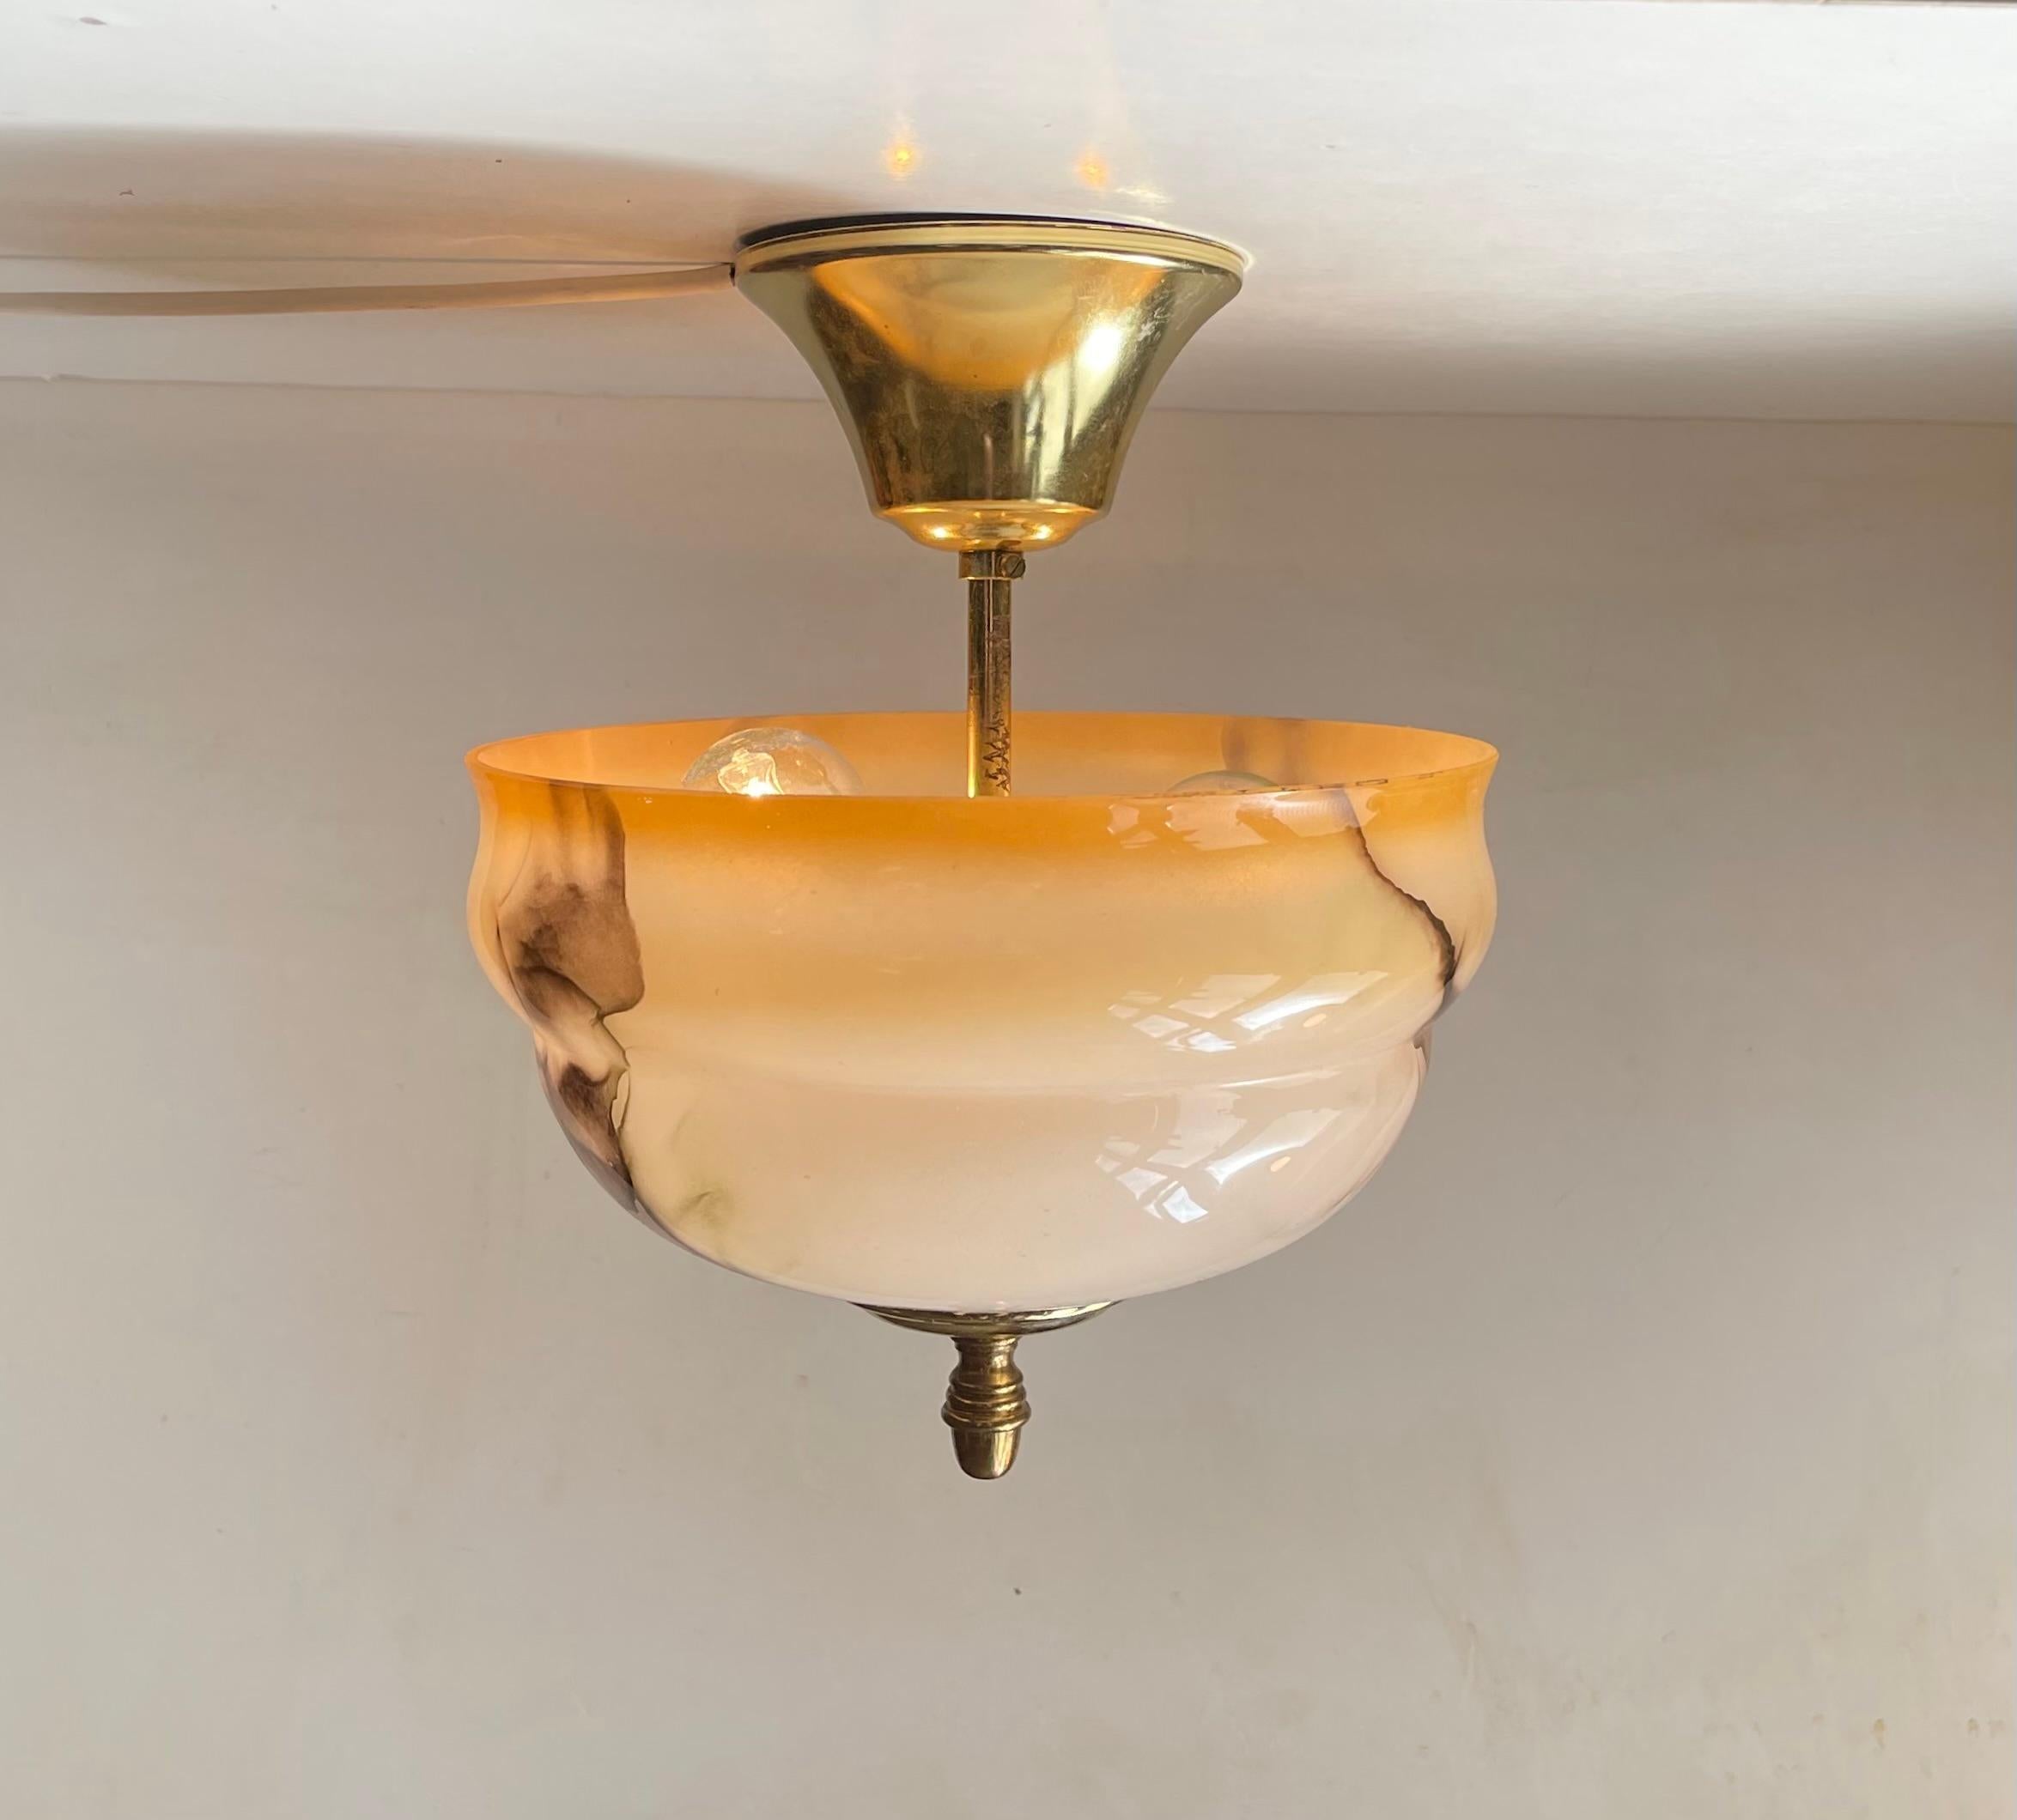 Flush mount ceiling light with two bulbs. Composed of a marbled opaline glass shade with brass hardware. Unknown Scandinavian/Danish maker circa 1960-70. Functionalist - Art Deco revival in style. Measurements: D: 22 cm, H: 25 cm. 3 meters new white